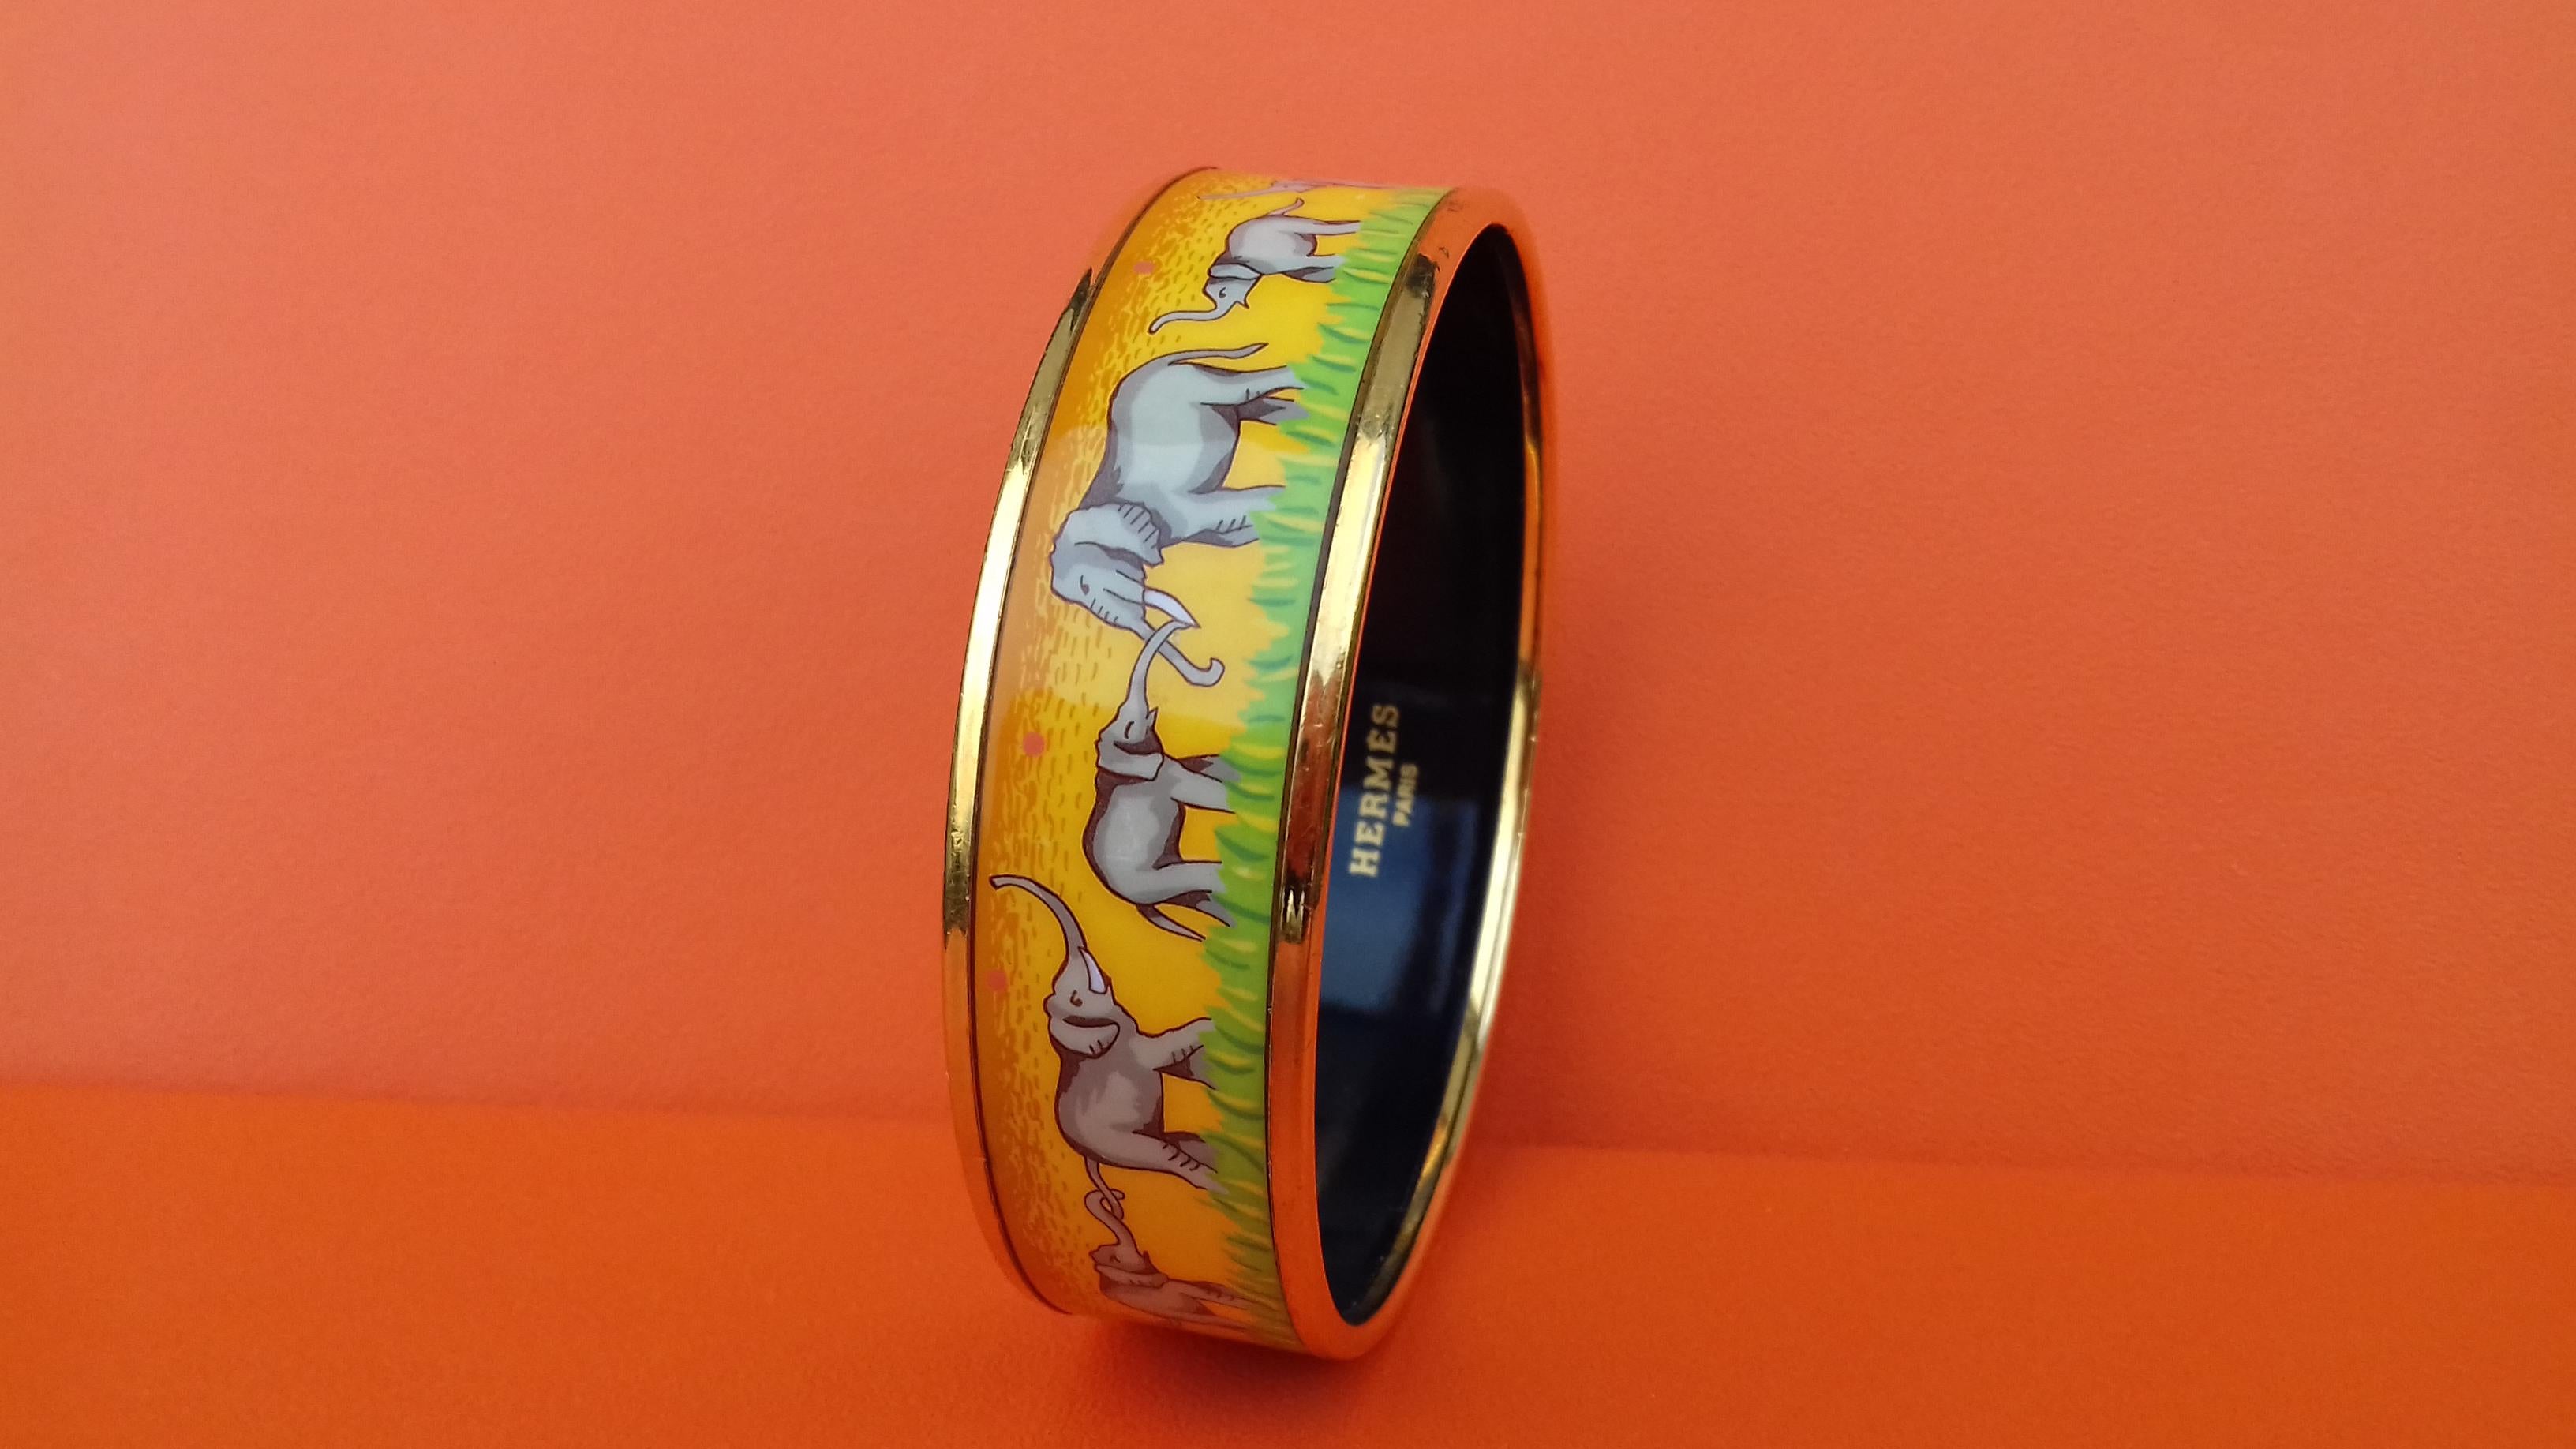 Gorgeous Authentic Hermès Bracelet

A grail ! Hard to find

Pattern: Elephants Grazing

Made in Austria + I

Made of printed Enamel and Gold Plated Hardware

Colorways: Yellow background with discreet Pink peas, Grey elephants and Green grass,